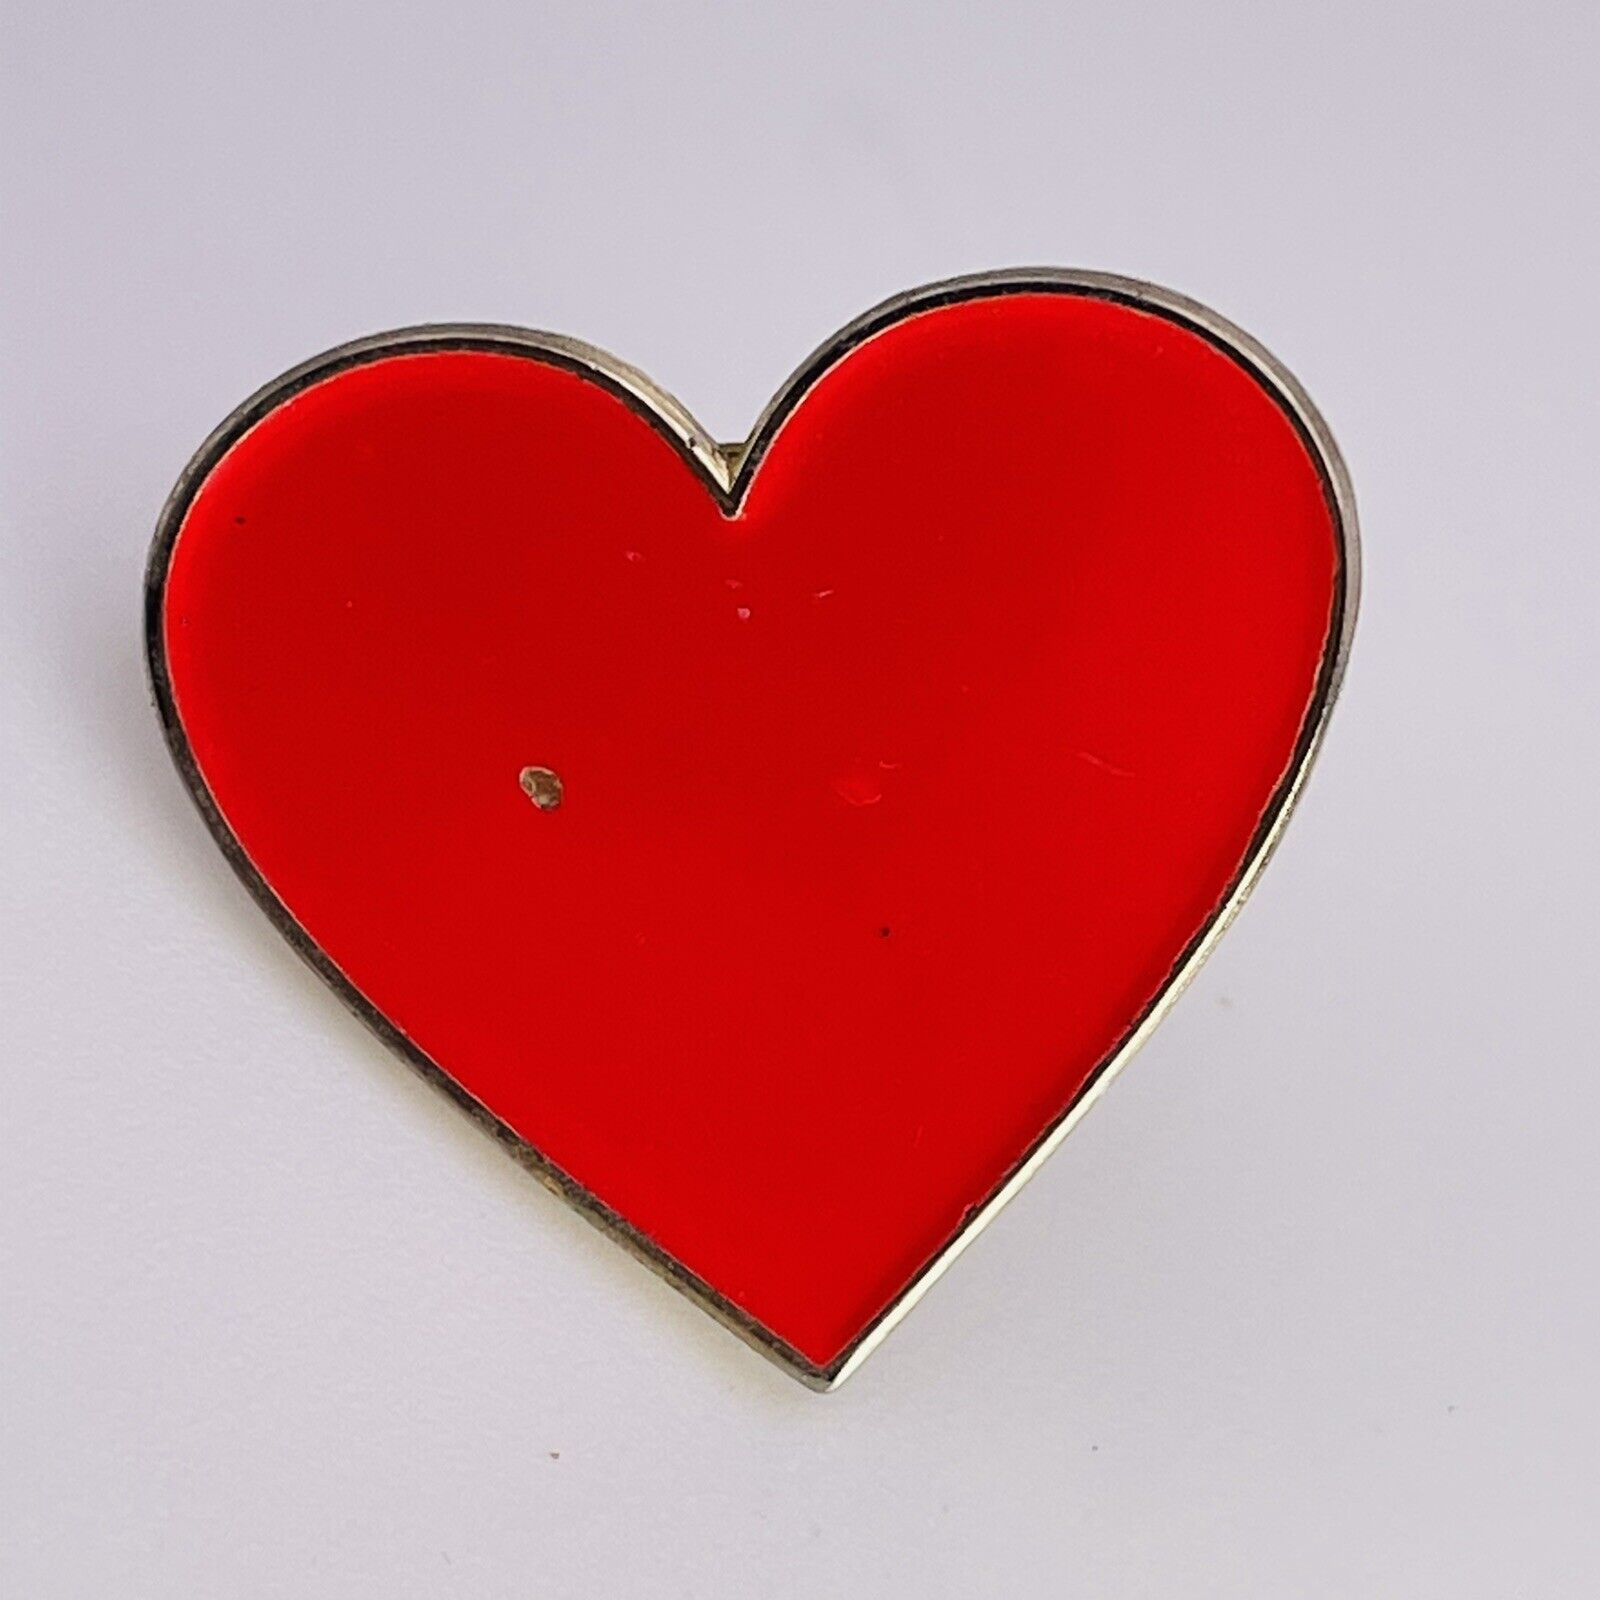 Stunning Red Heart - Chipped With Love  Enamel Pin - Lapel, Jacket, Hat - Nice